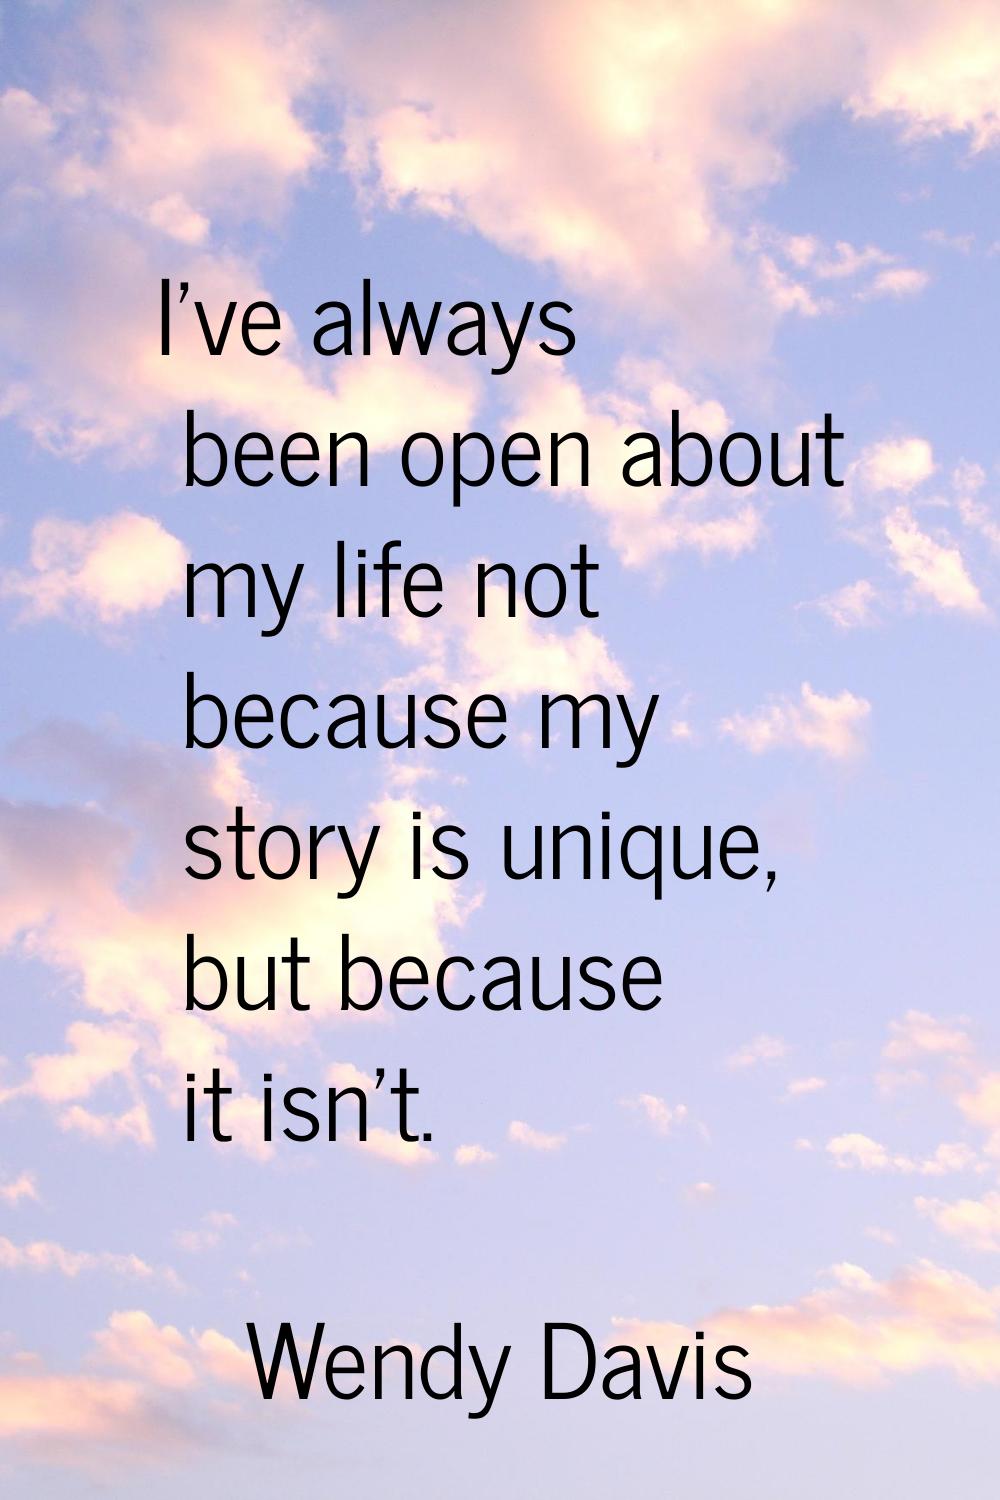 I've always been open about my life not because my story is unique, but because it isn't.